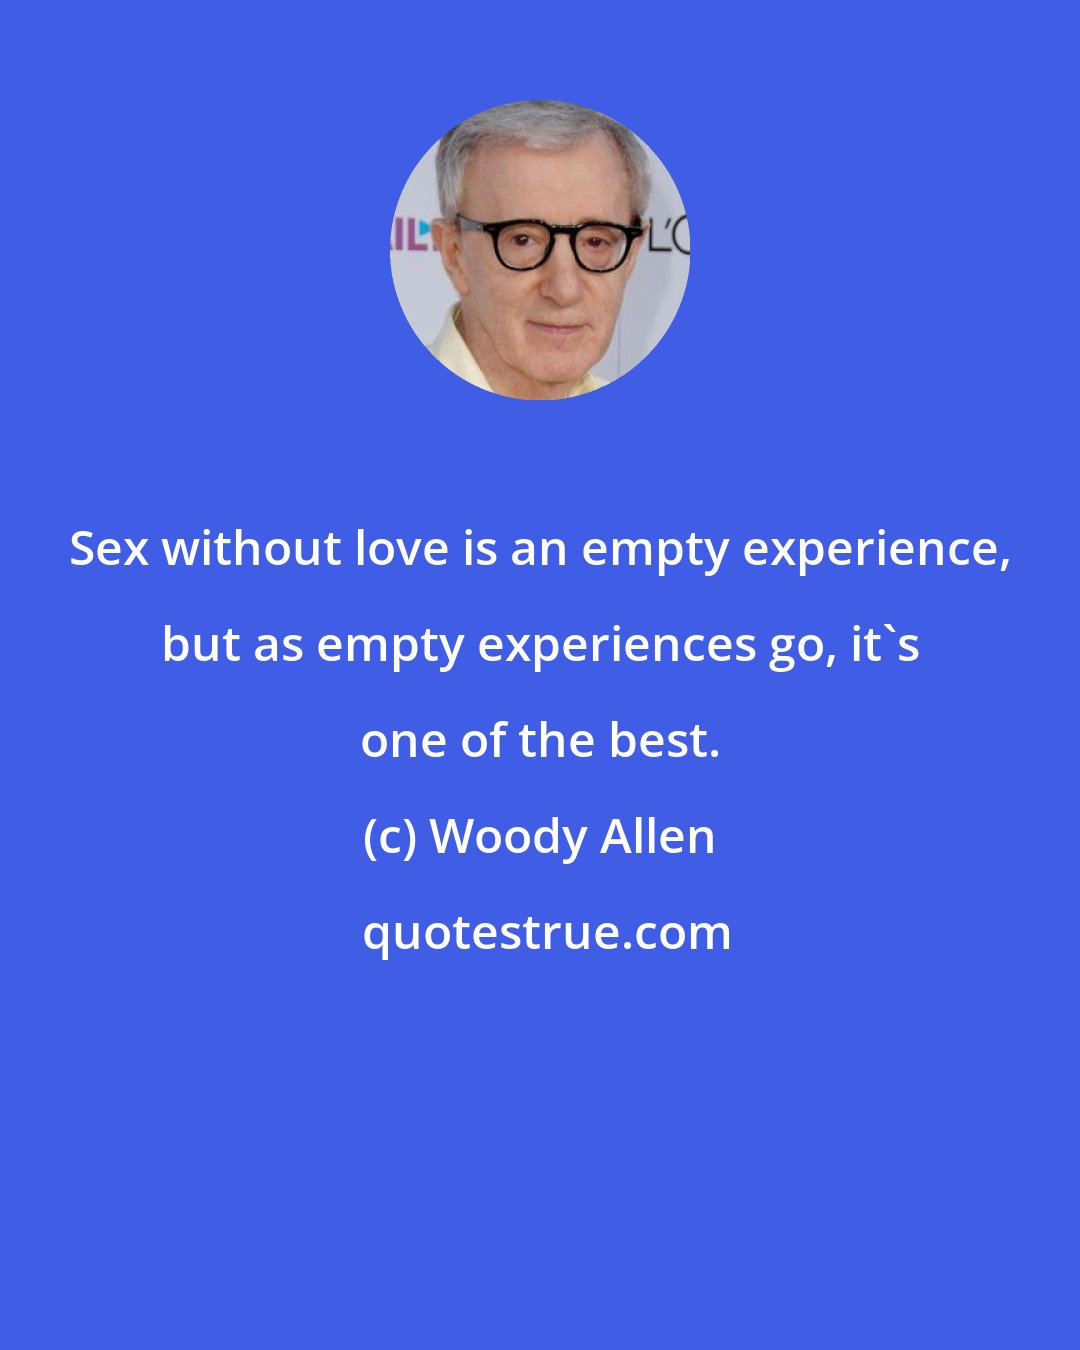 Woody Allen: Sex without love is an empty experience, but as empty experiences go, it's one of the best.